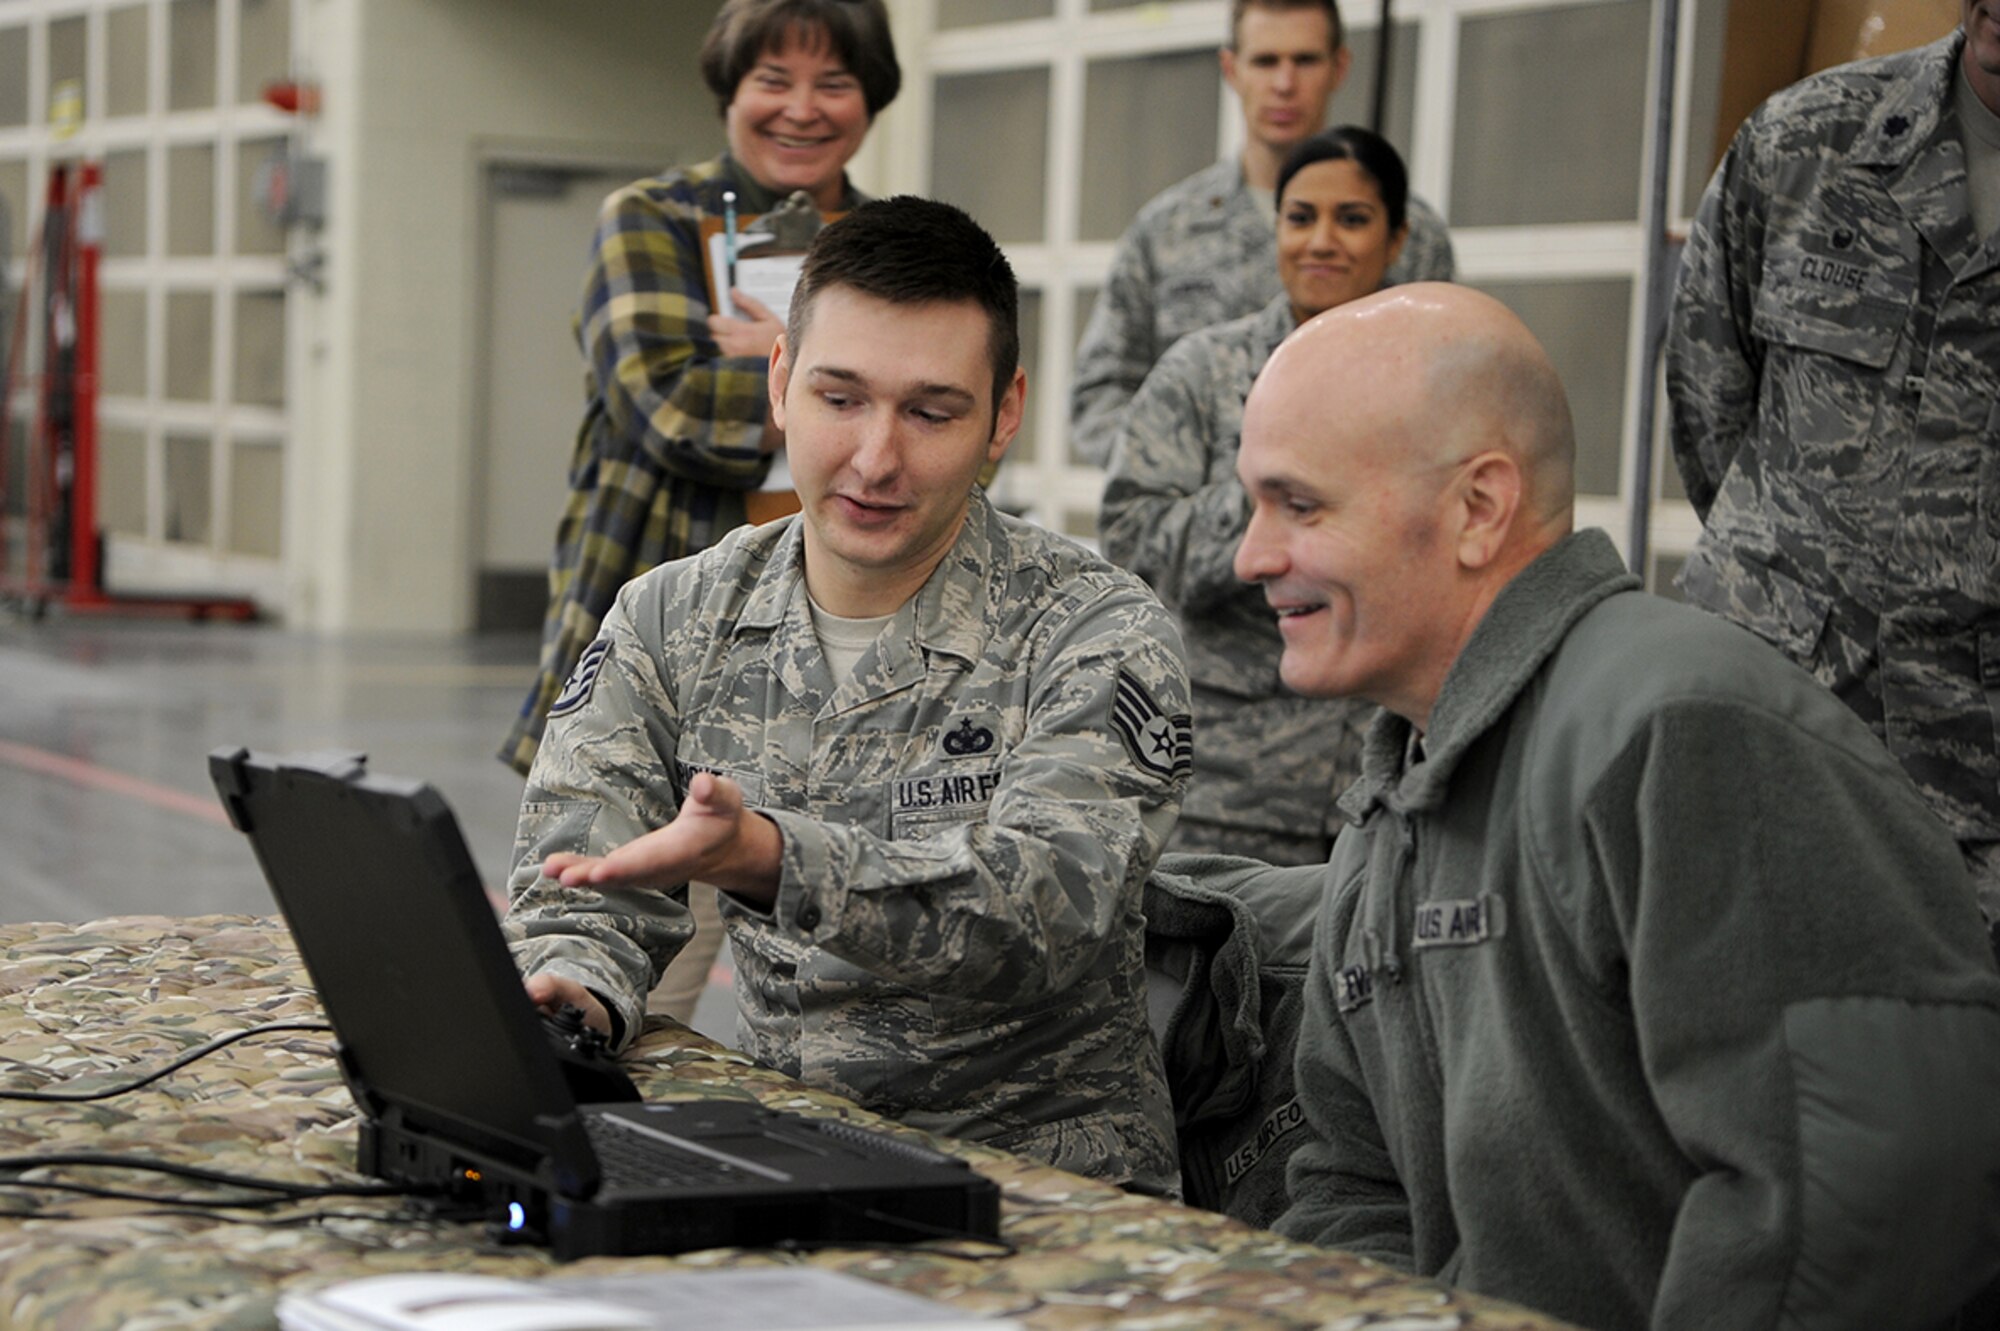 U.S. Air Force Staff Sgt. Evan Wright, left, 628th Security Forces Squadron, instructor, discusses the capabilities of the Man-Portable Anti-drone System Kit computer interface with U.S. Air Force General Carlton D. Everhart, Air Mobility Command commander, Jan. 17, 2018. Everhart visited Mobility Airmen from various units at Joint Base Charleston to gain valuable insight of their mission successes along with the challenges they may face while executing rapid global mobility.